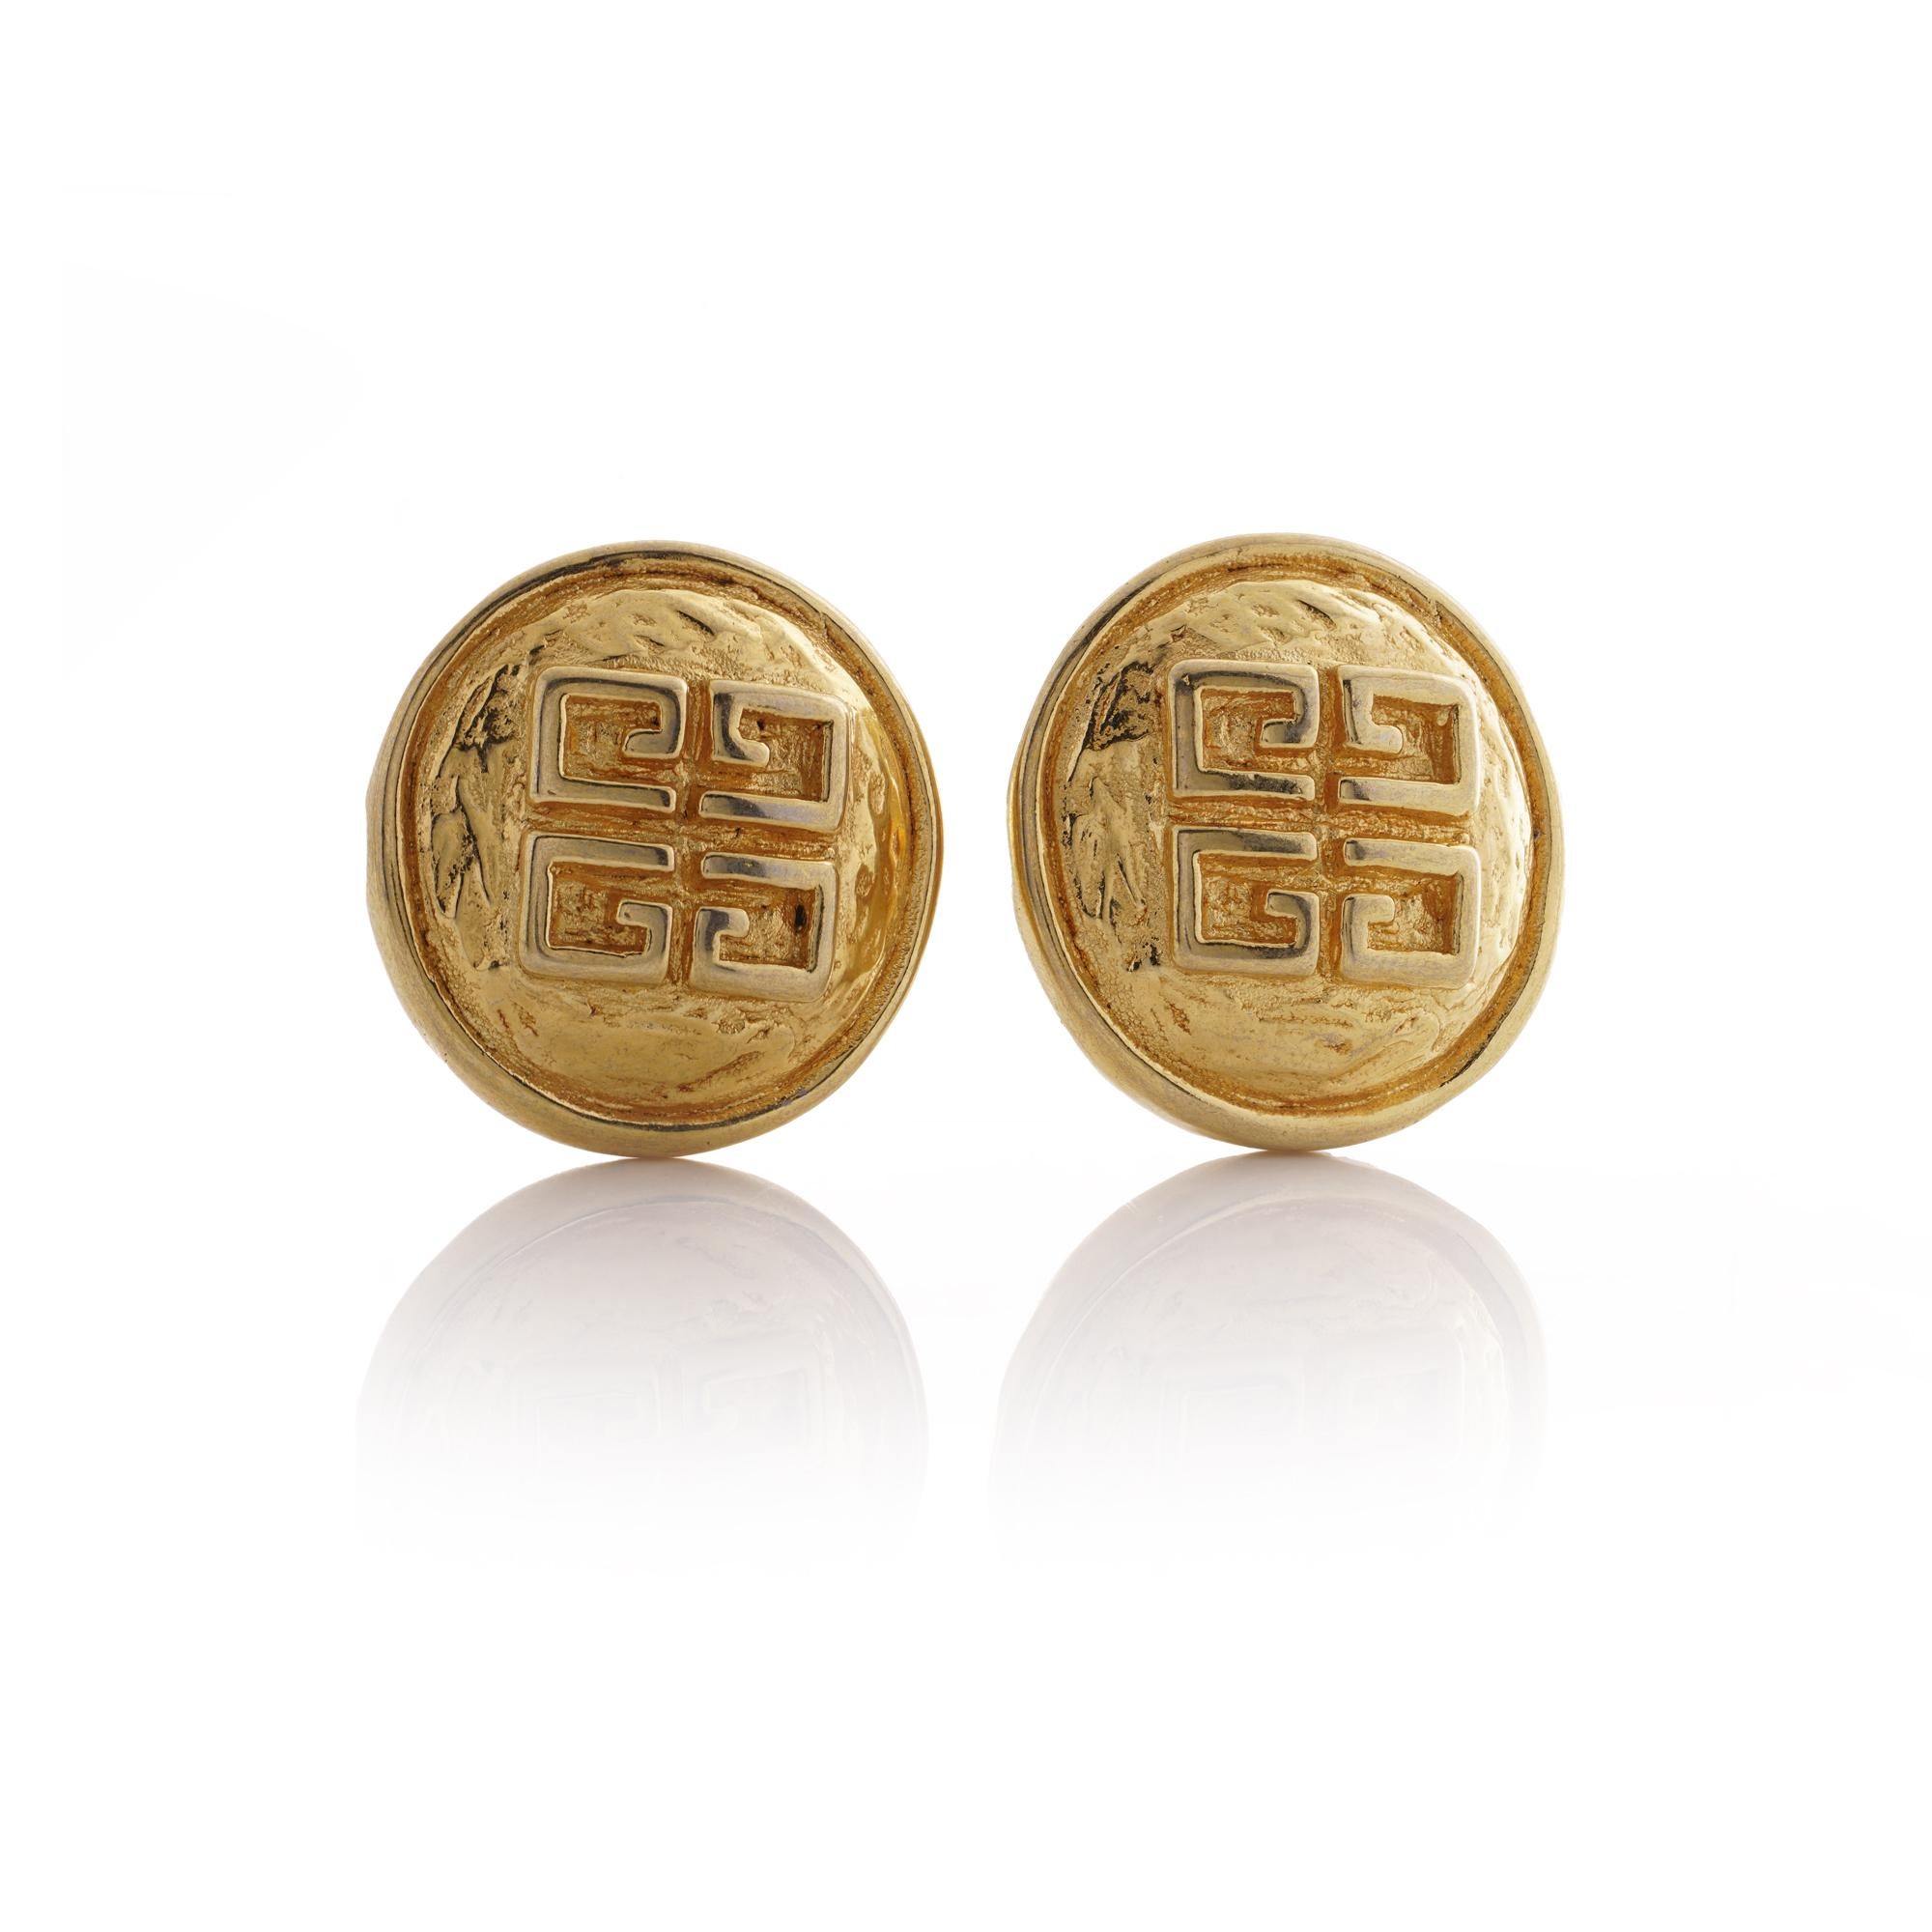 Clip-On Earrings, crafted circa the 1980s, emanating the refined elegance and timeless sophistication associated with the Givenchy brand.

Hailing from the iconic fashion house of Givenchy in France, these earrings bear the esteemed 4G logo,